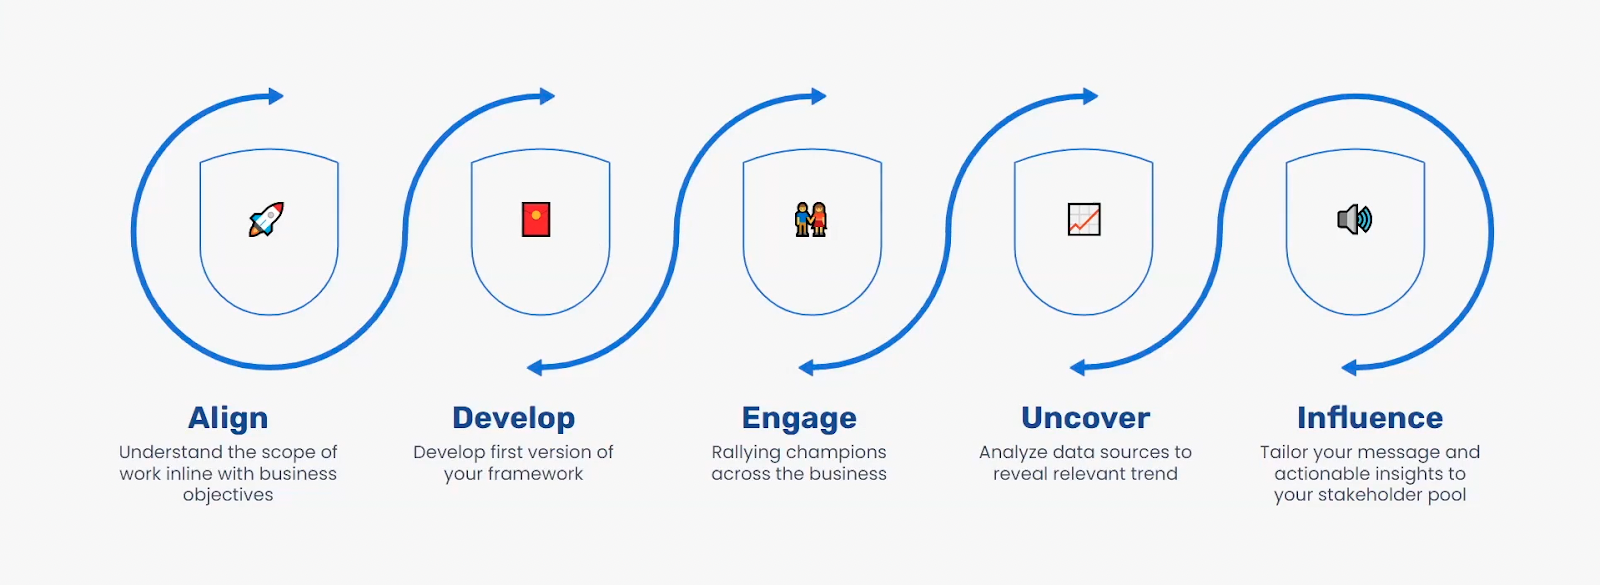 Alt: Image shows the five steps of the CX framework, align, develop, engage, uncover, and influence.